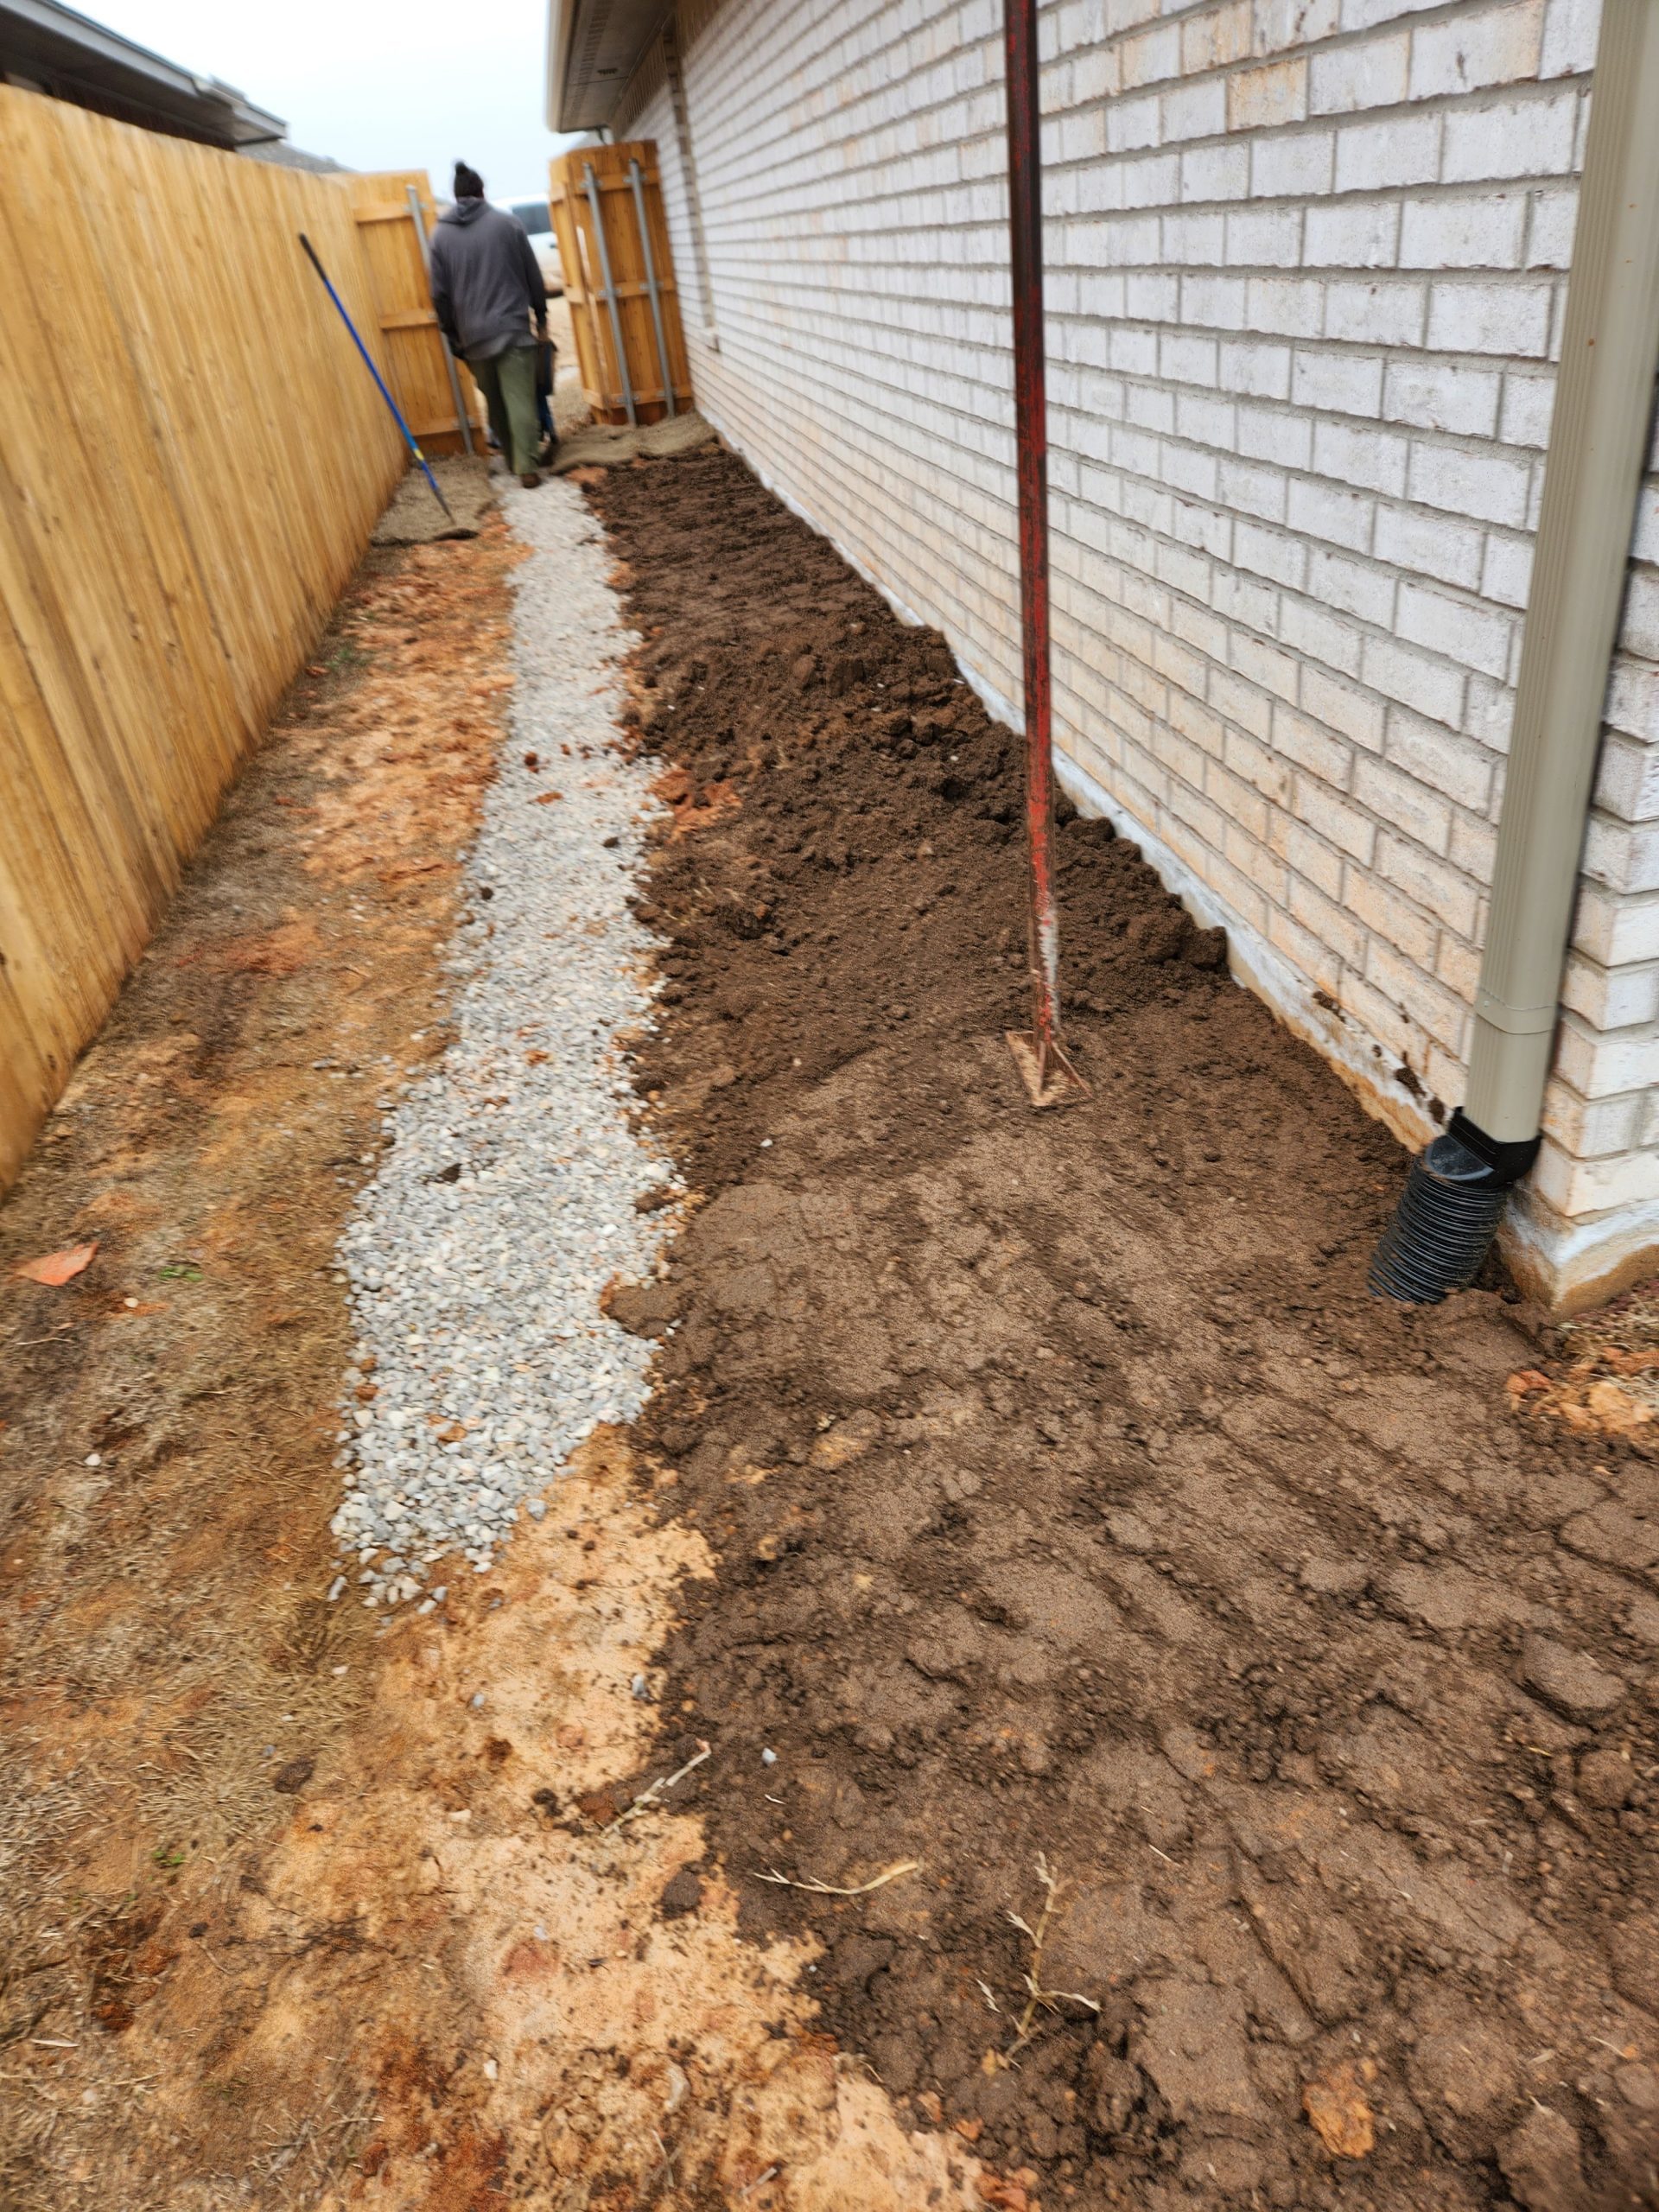 French Drain down the side of a house